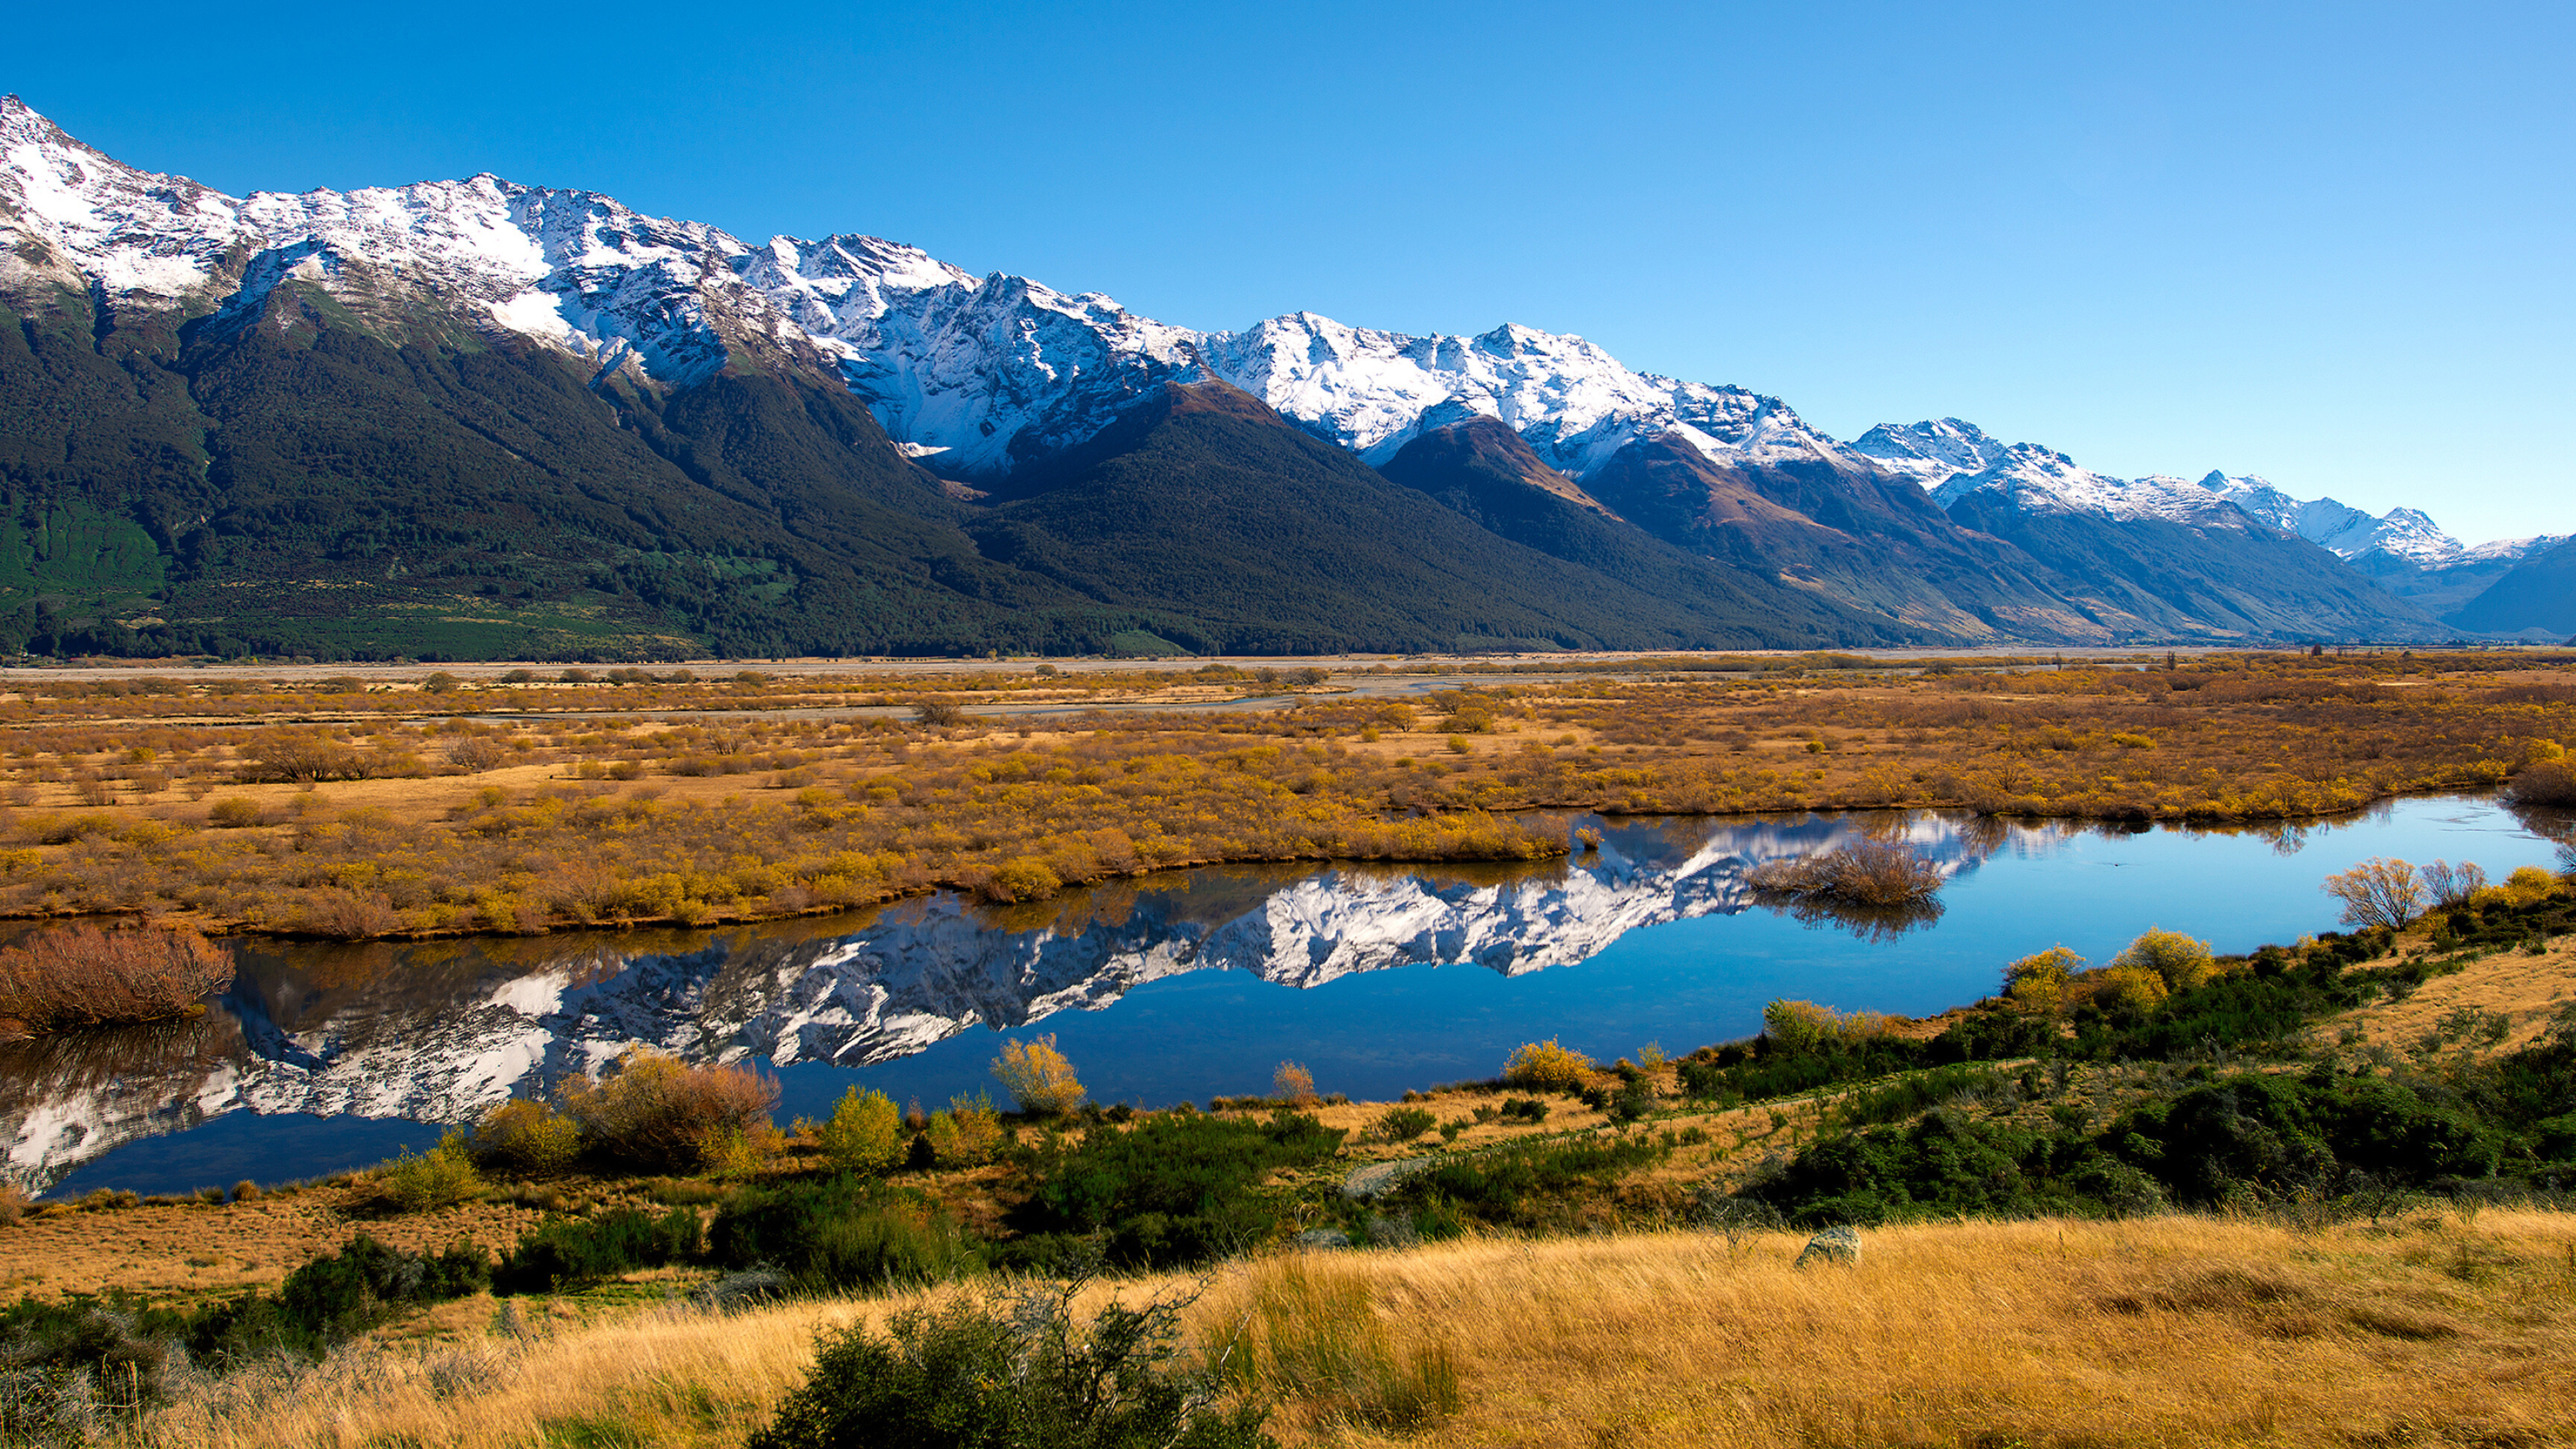 New Zealand: The country consists of two main landmasses and over 700 smaller islands. 3840x2160 4K Wallpaper.